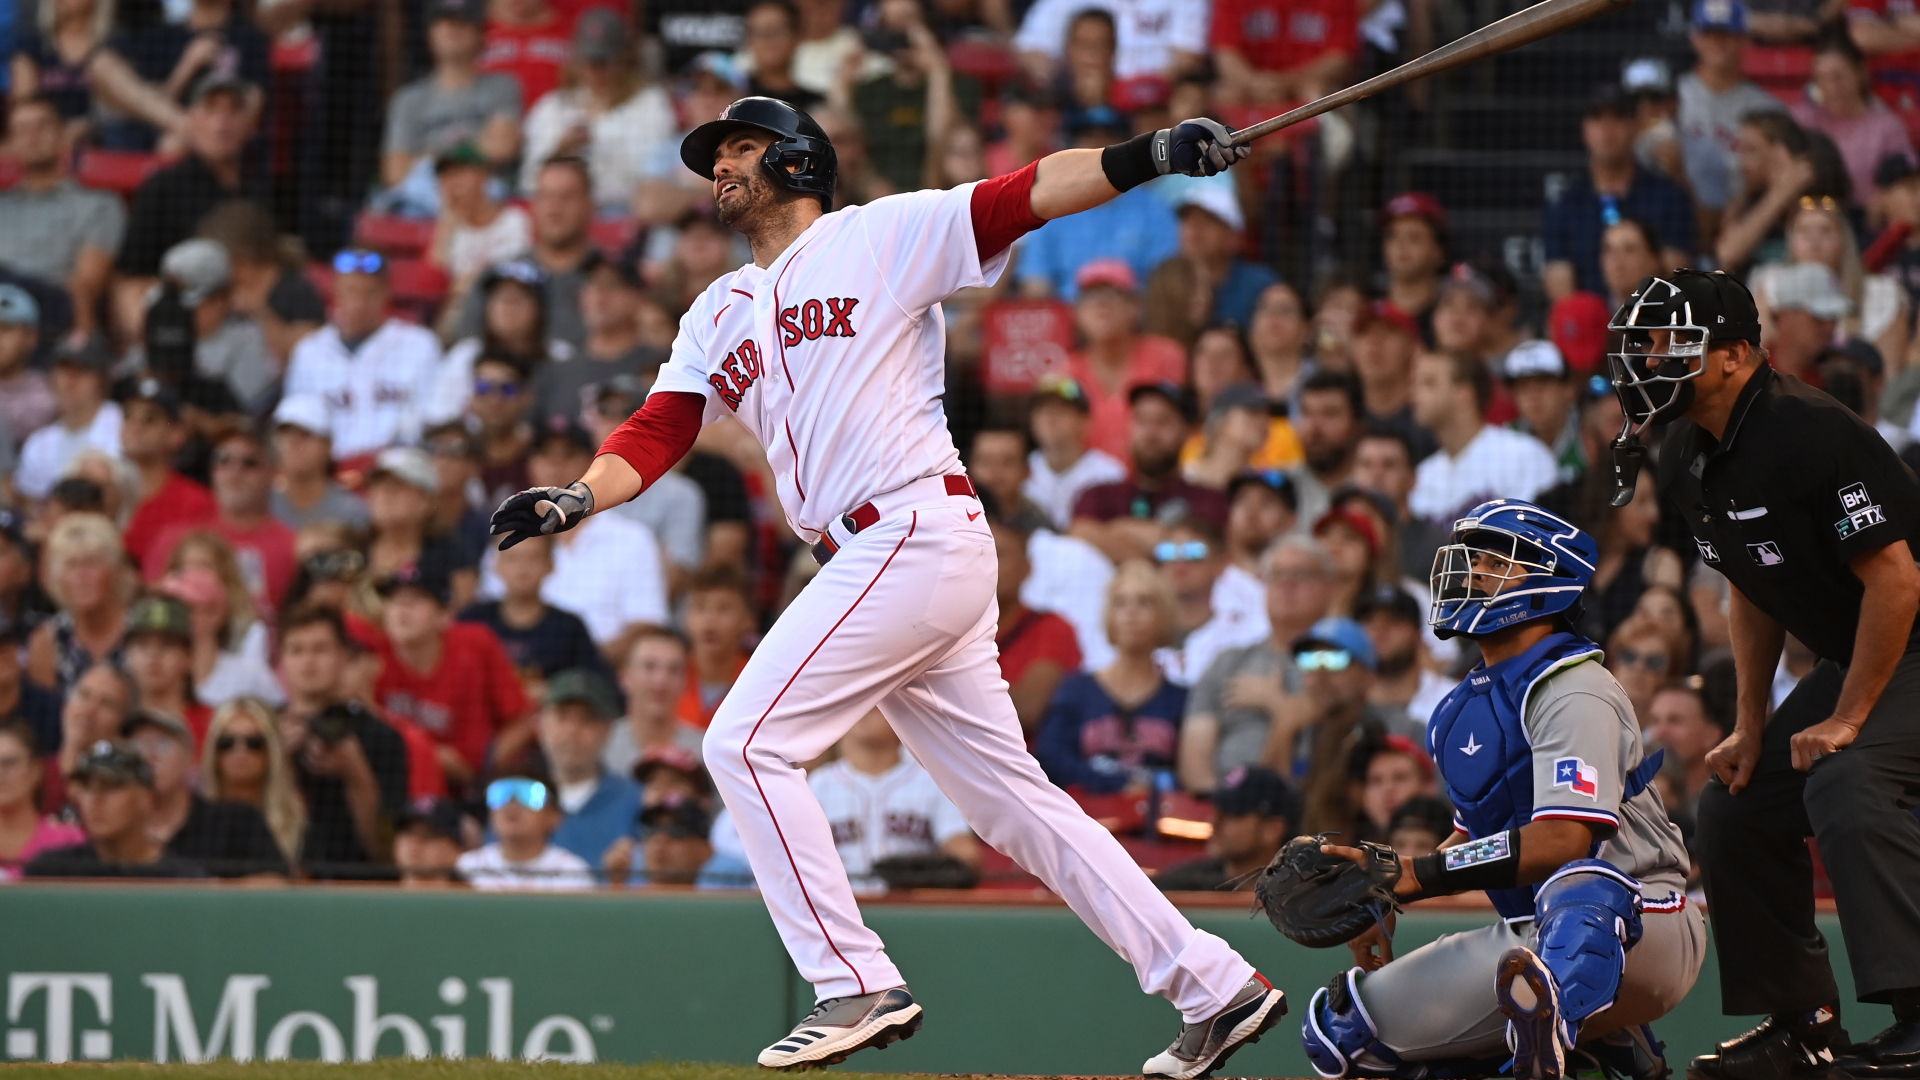 Another tough loss weighs heavily on J.D. Martinez, who says he